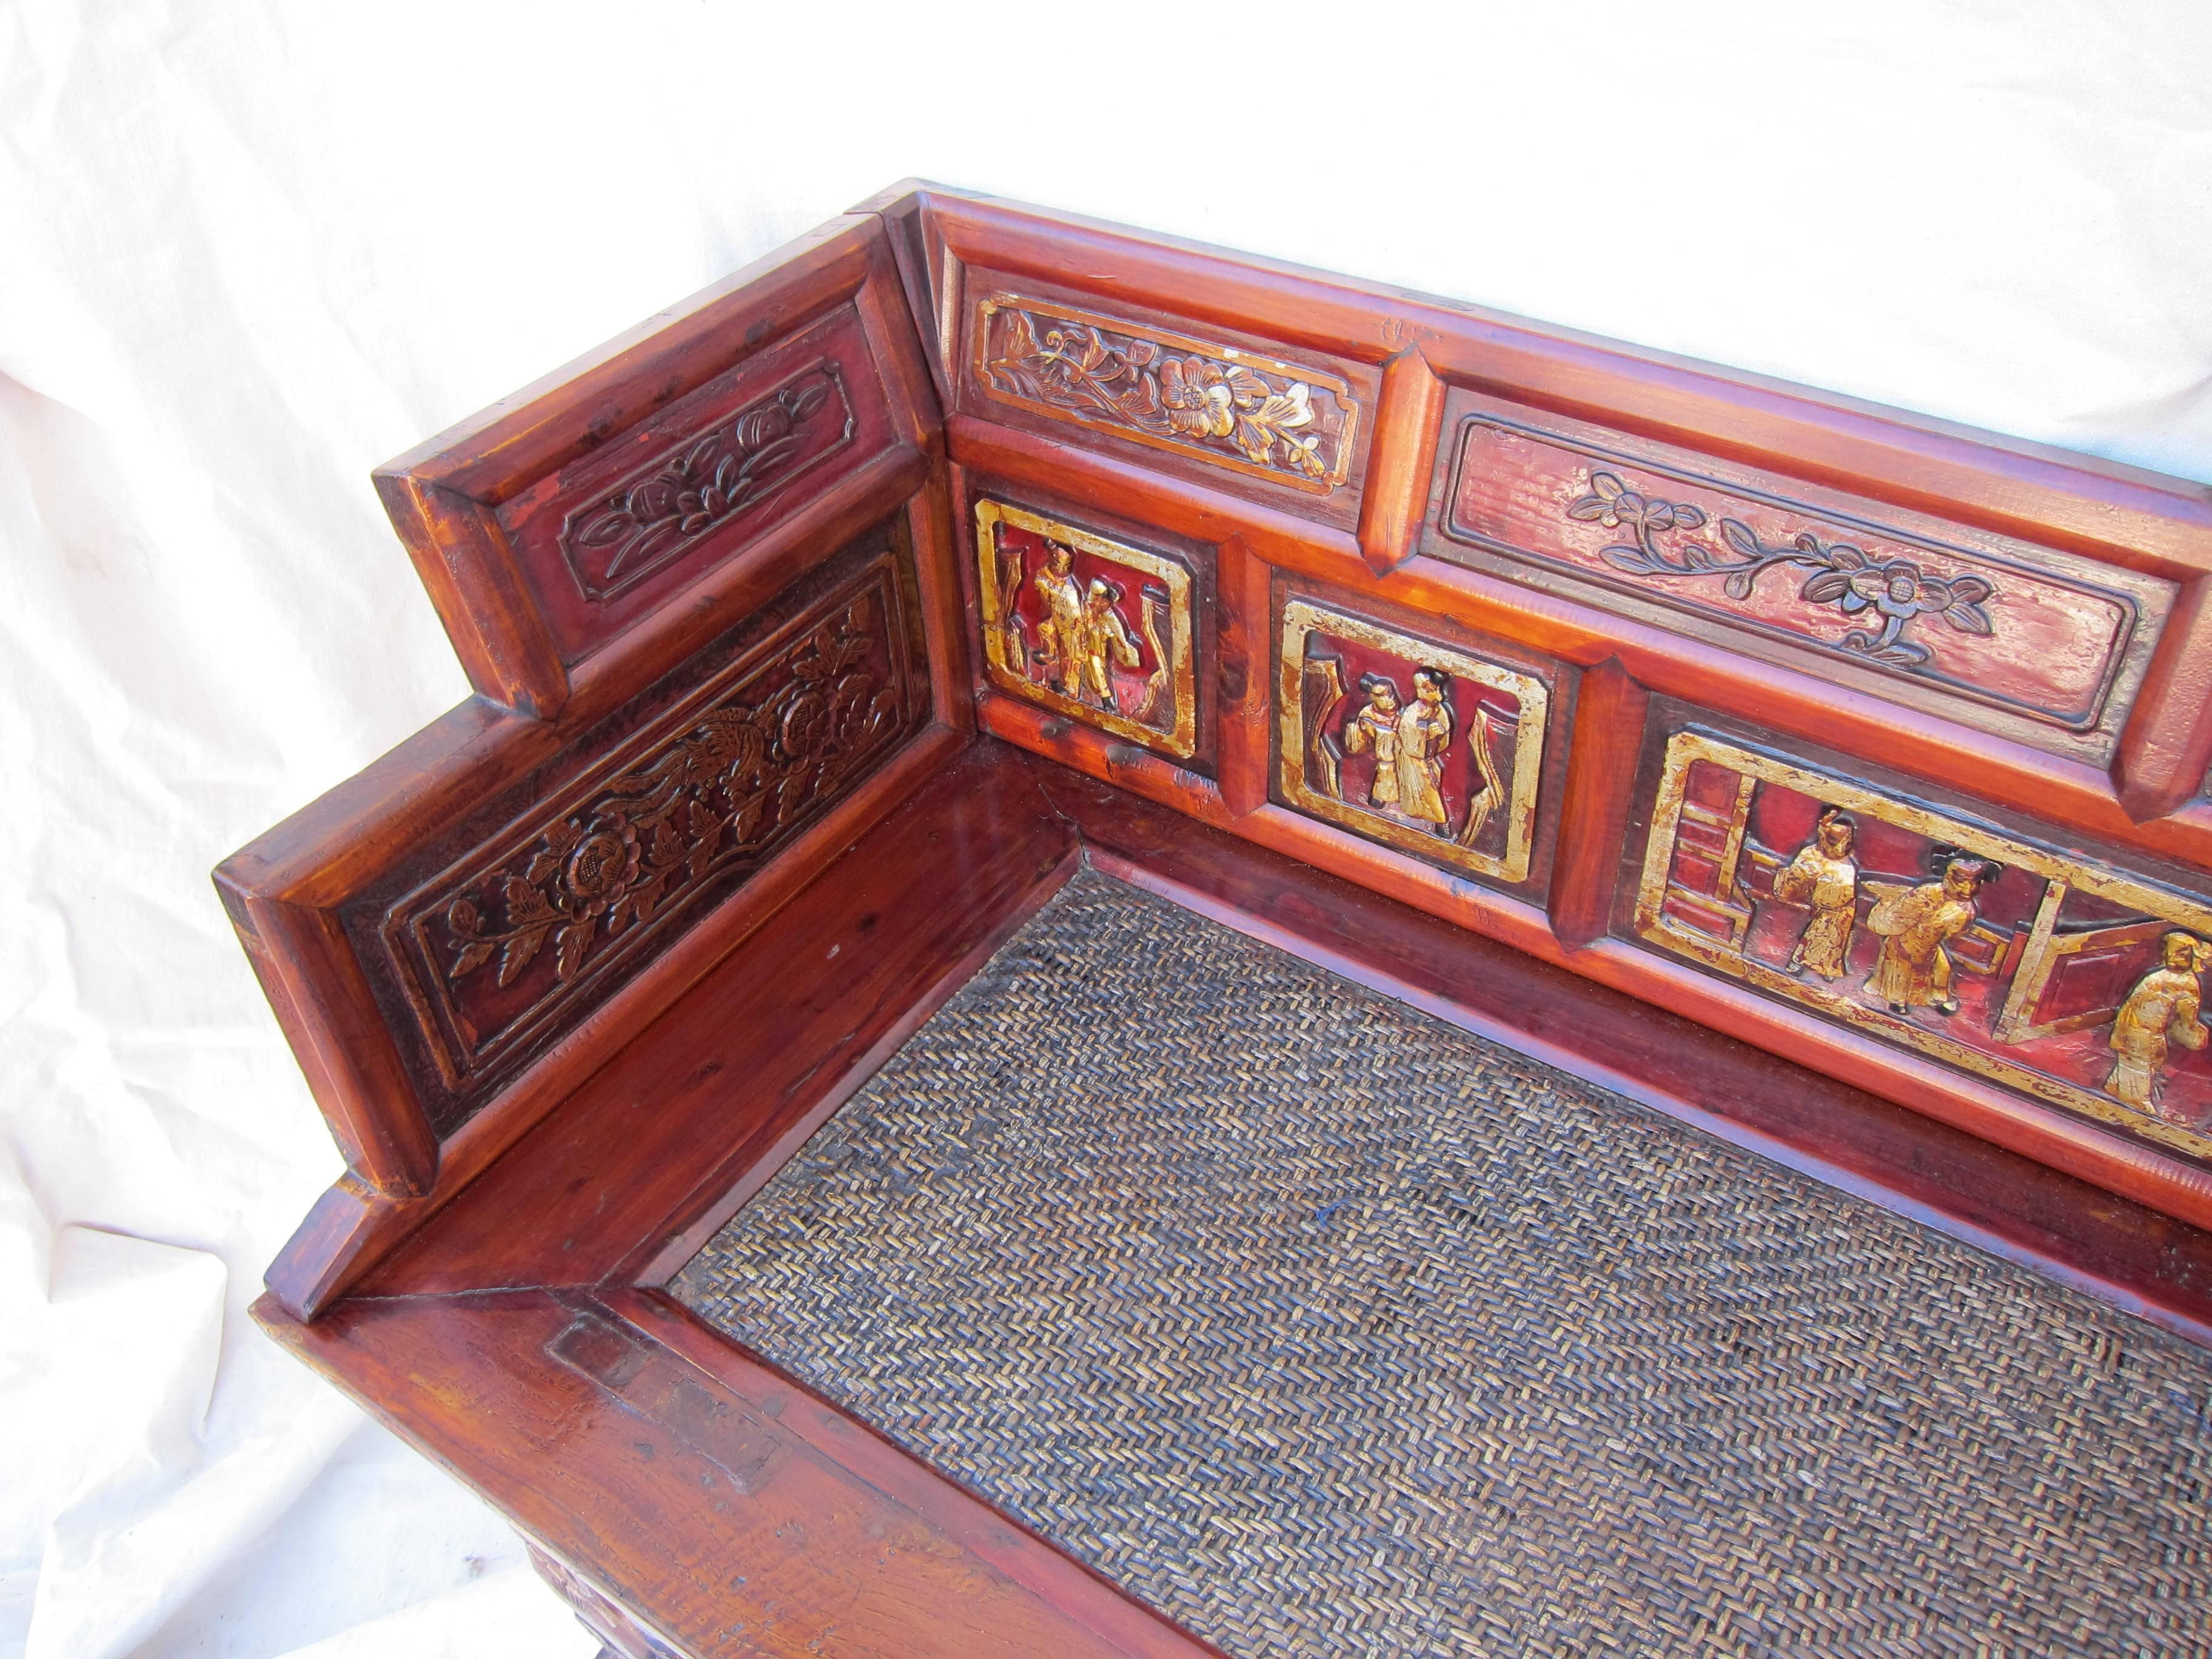 19th century Dynasty carved bench hall seat. Rattan topped seat with Elm and Cypress wood. Carved and glided with auspicious character scenes in story board. Lions heads cared to front legs. Two Foo Lions carved to the lower apron. A majestic